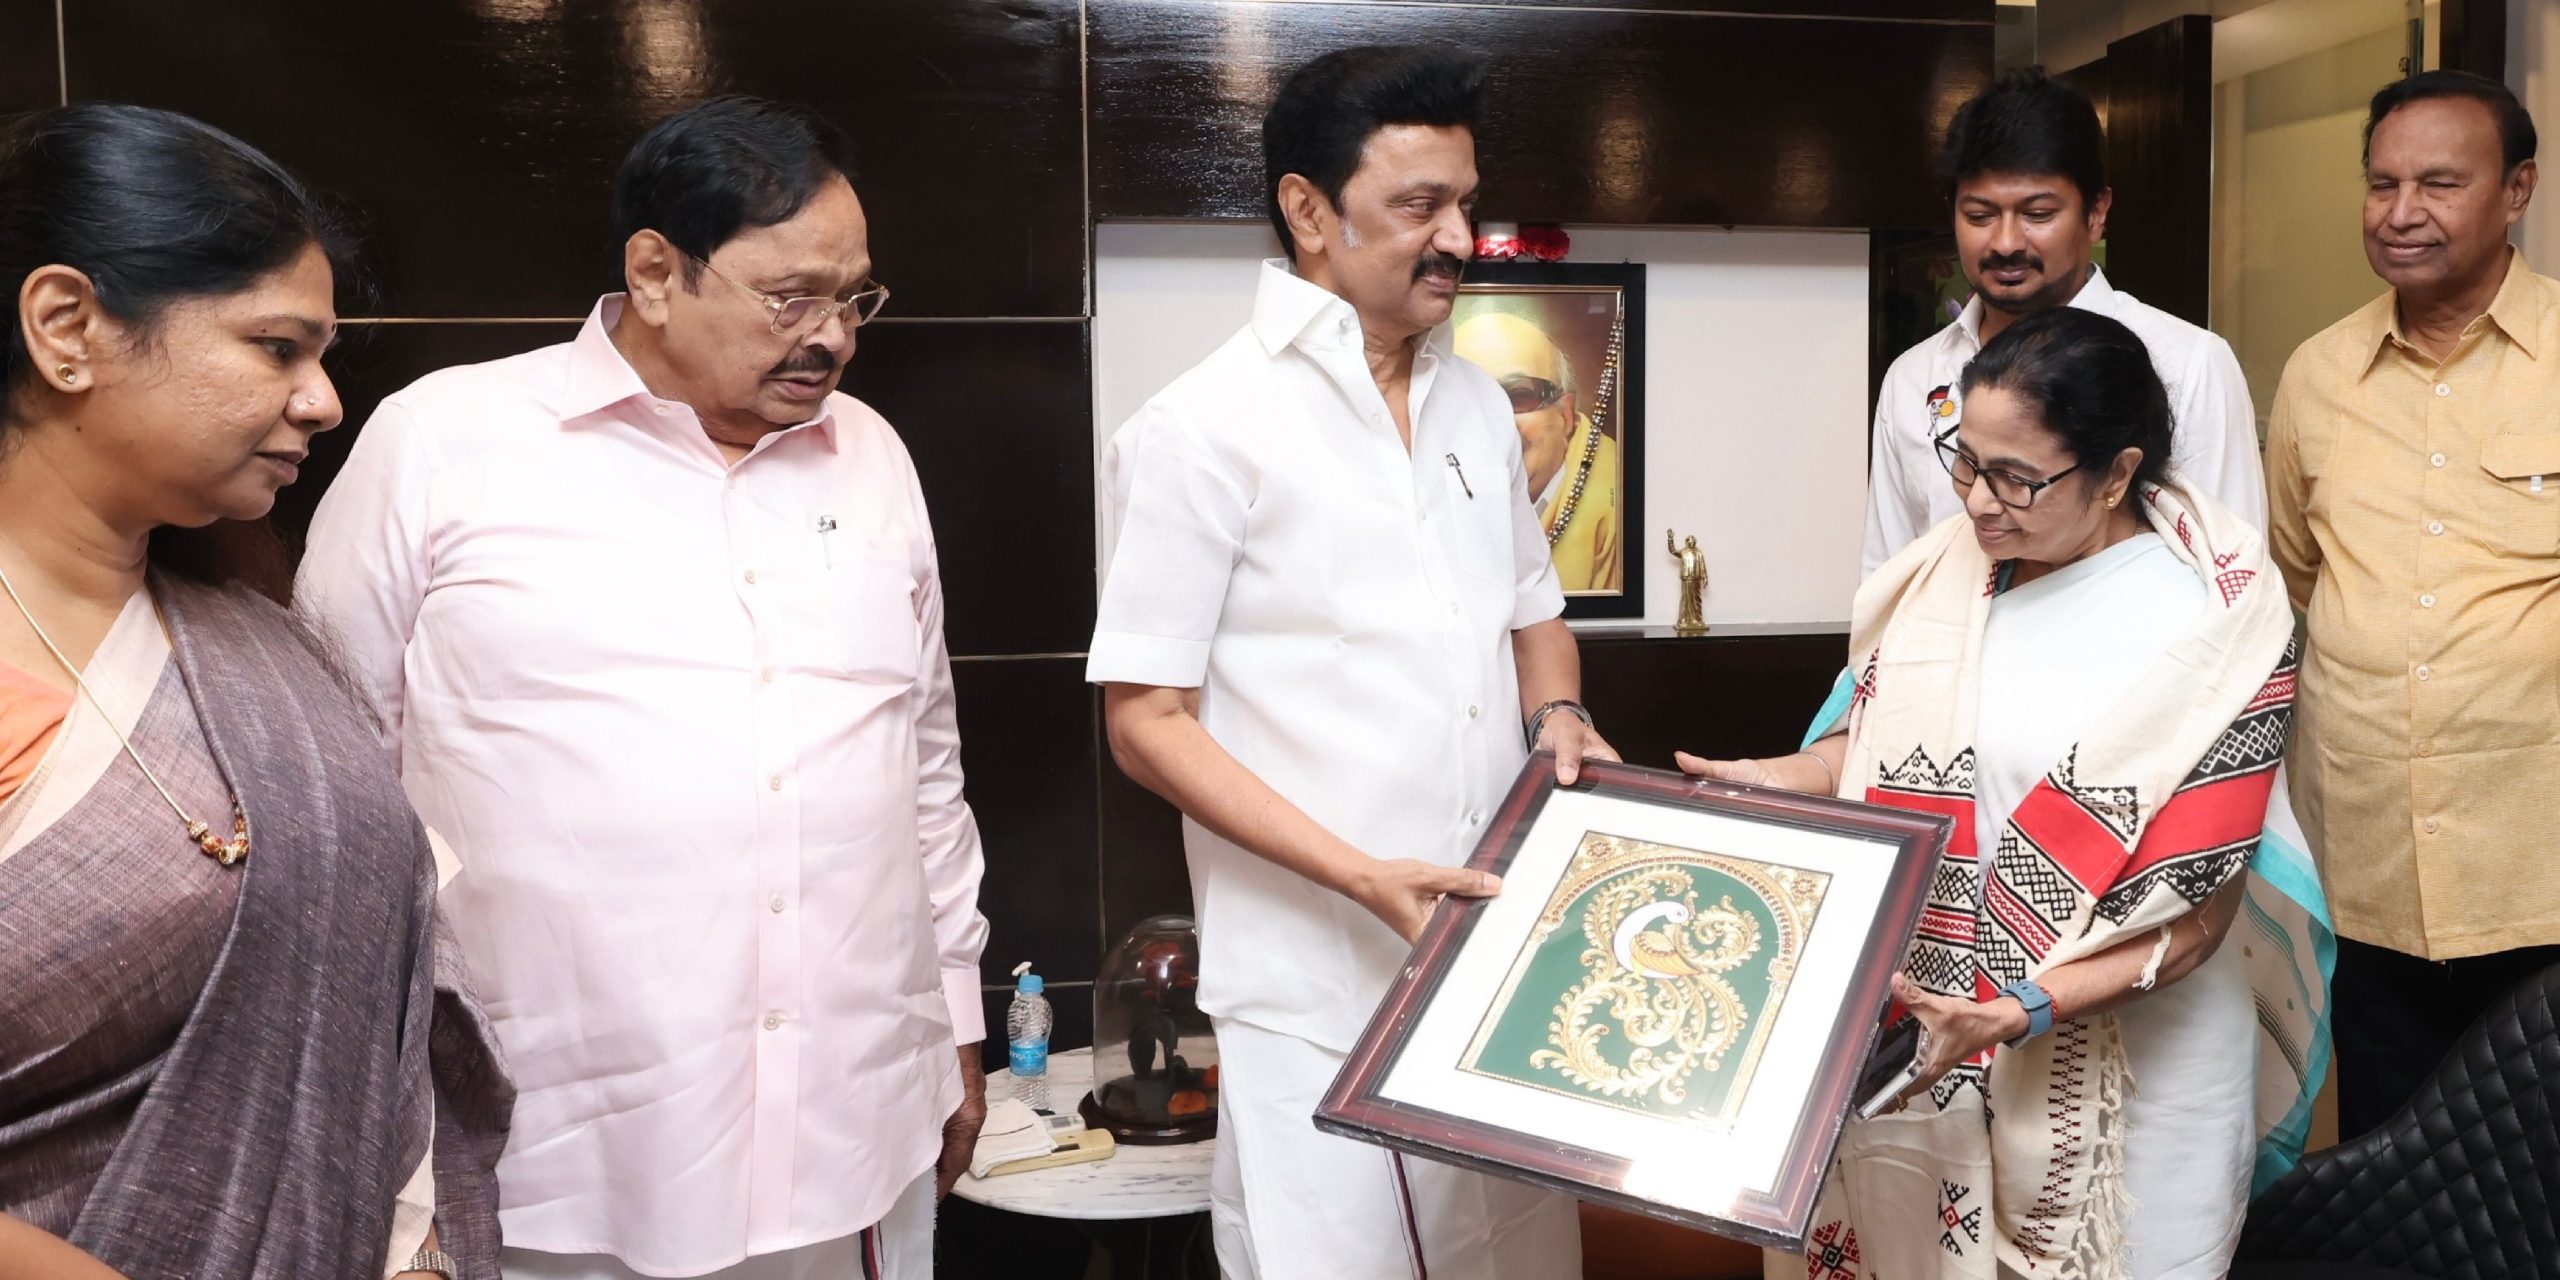 Tamil Nadu Chief Minister MK Stalin with his West Bengal counterpart Mamata Banerjee at his residence in Chennai on Wednesday, 2 November, 2022. (Supplied)